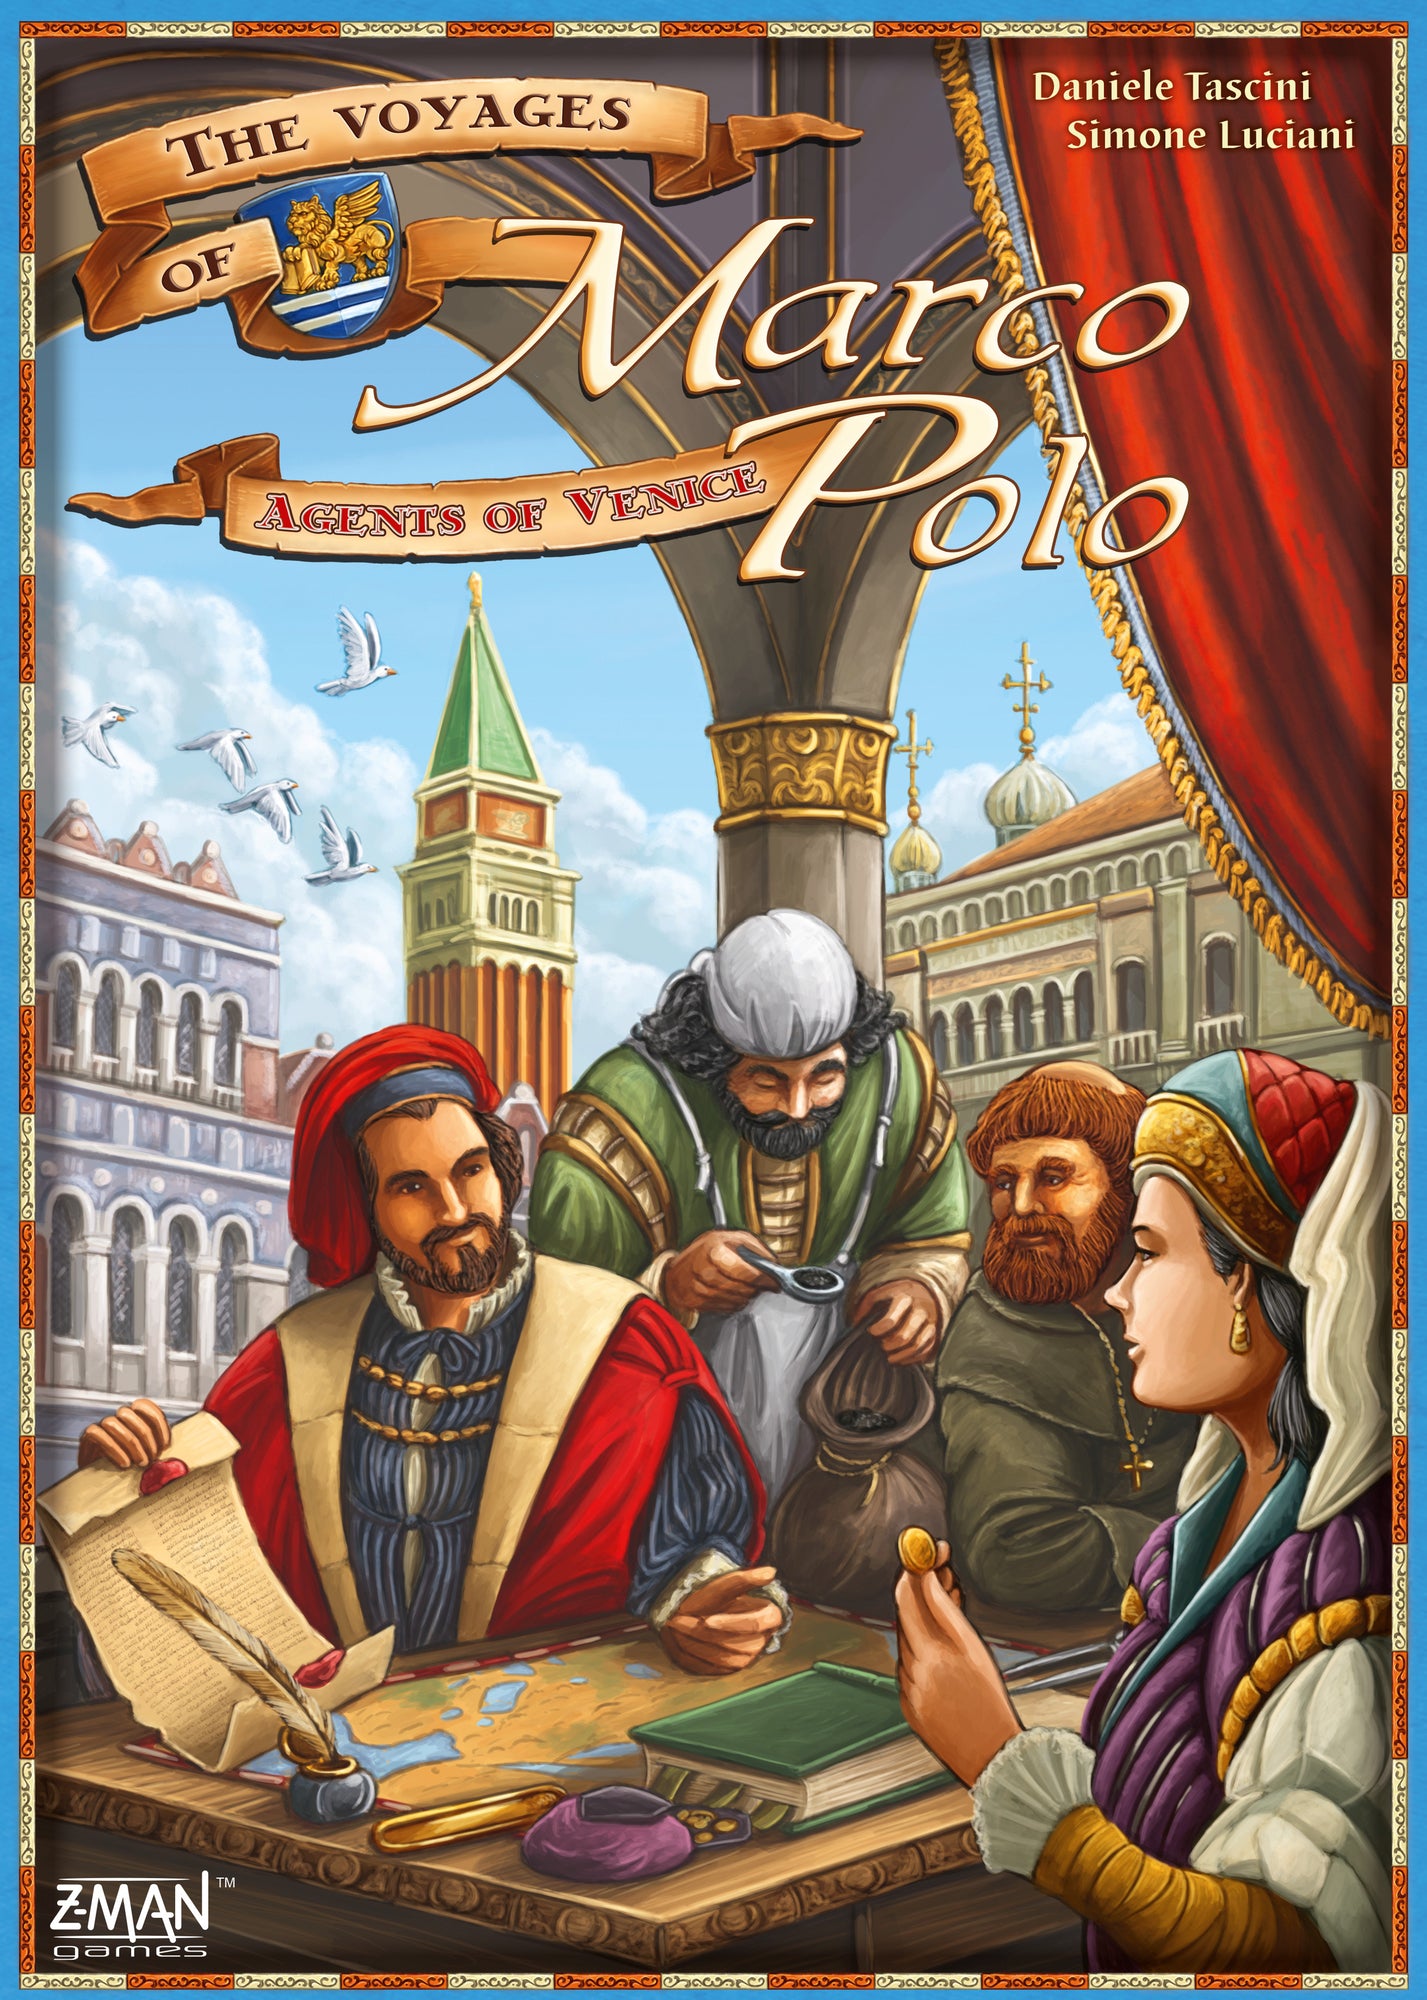 The Voyages of Marco Polo Venice Agents